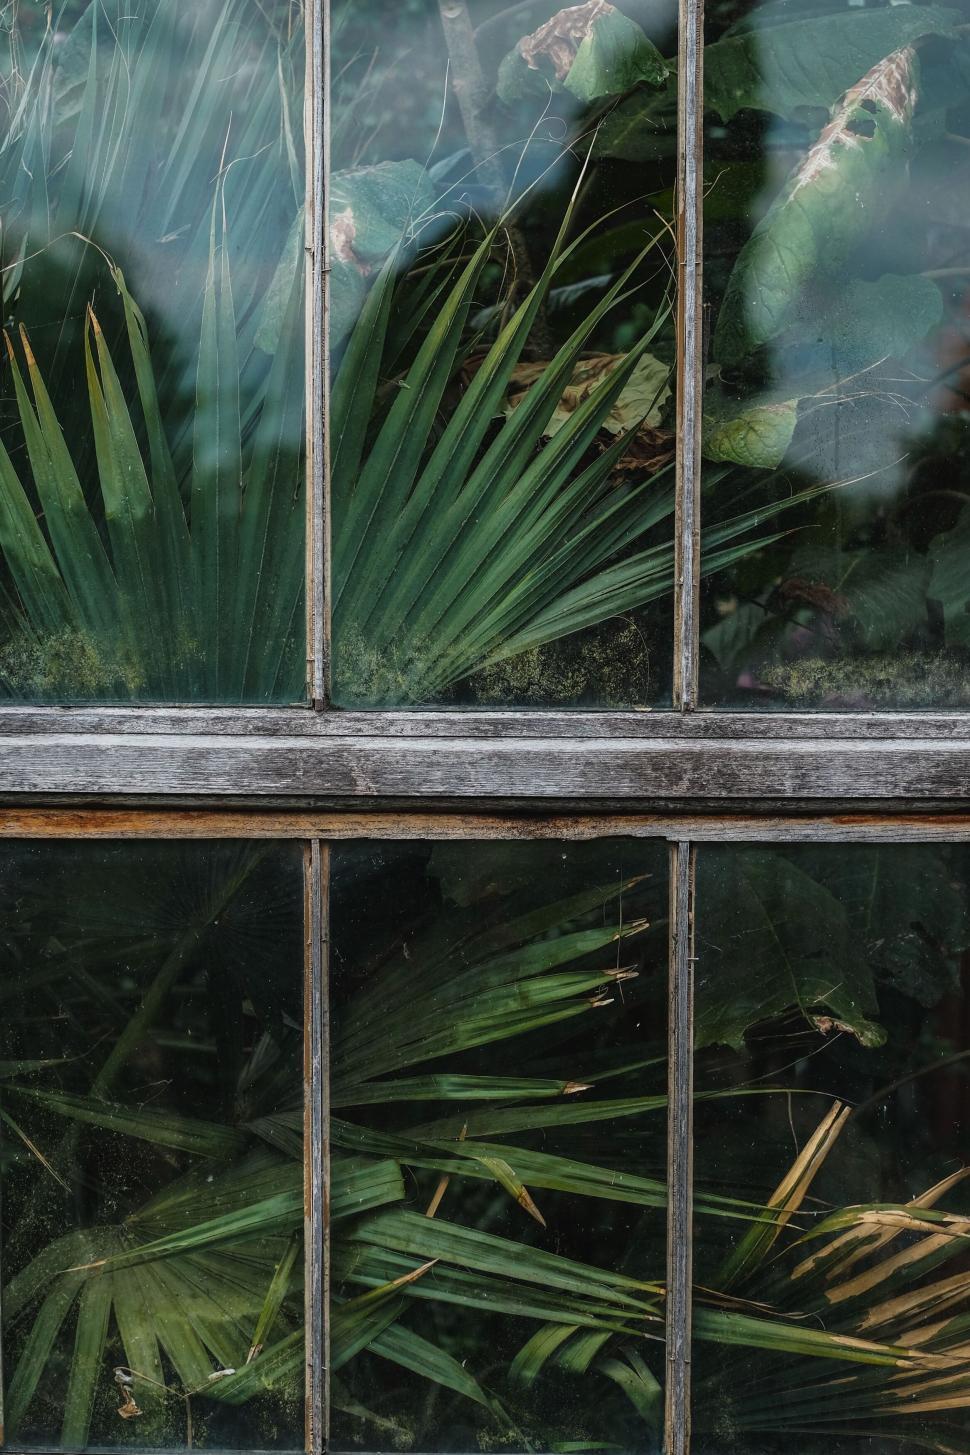 Free Image of Reflection of foliage in vintage greenhouse 